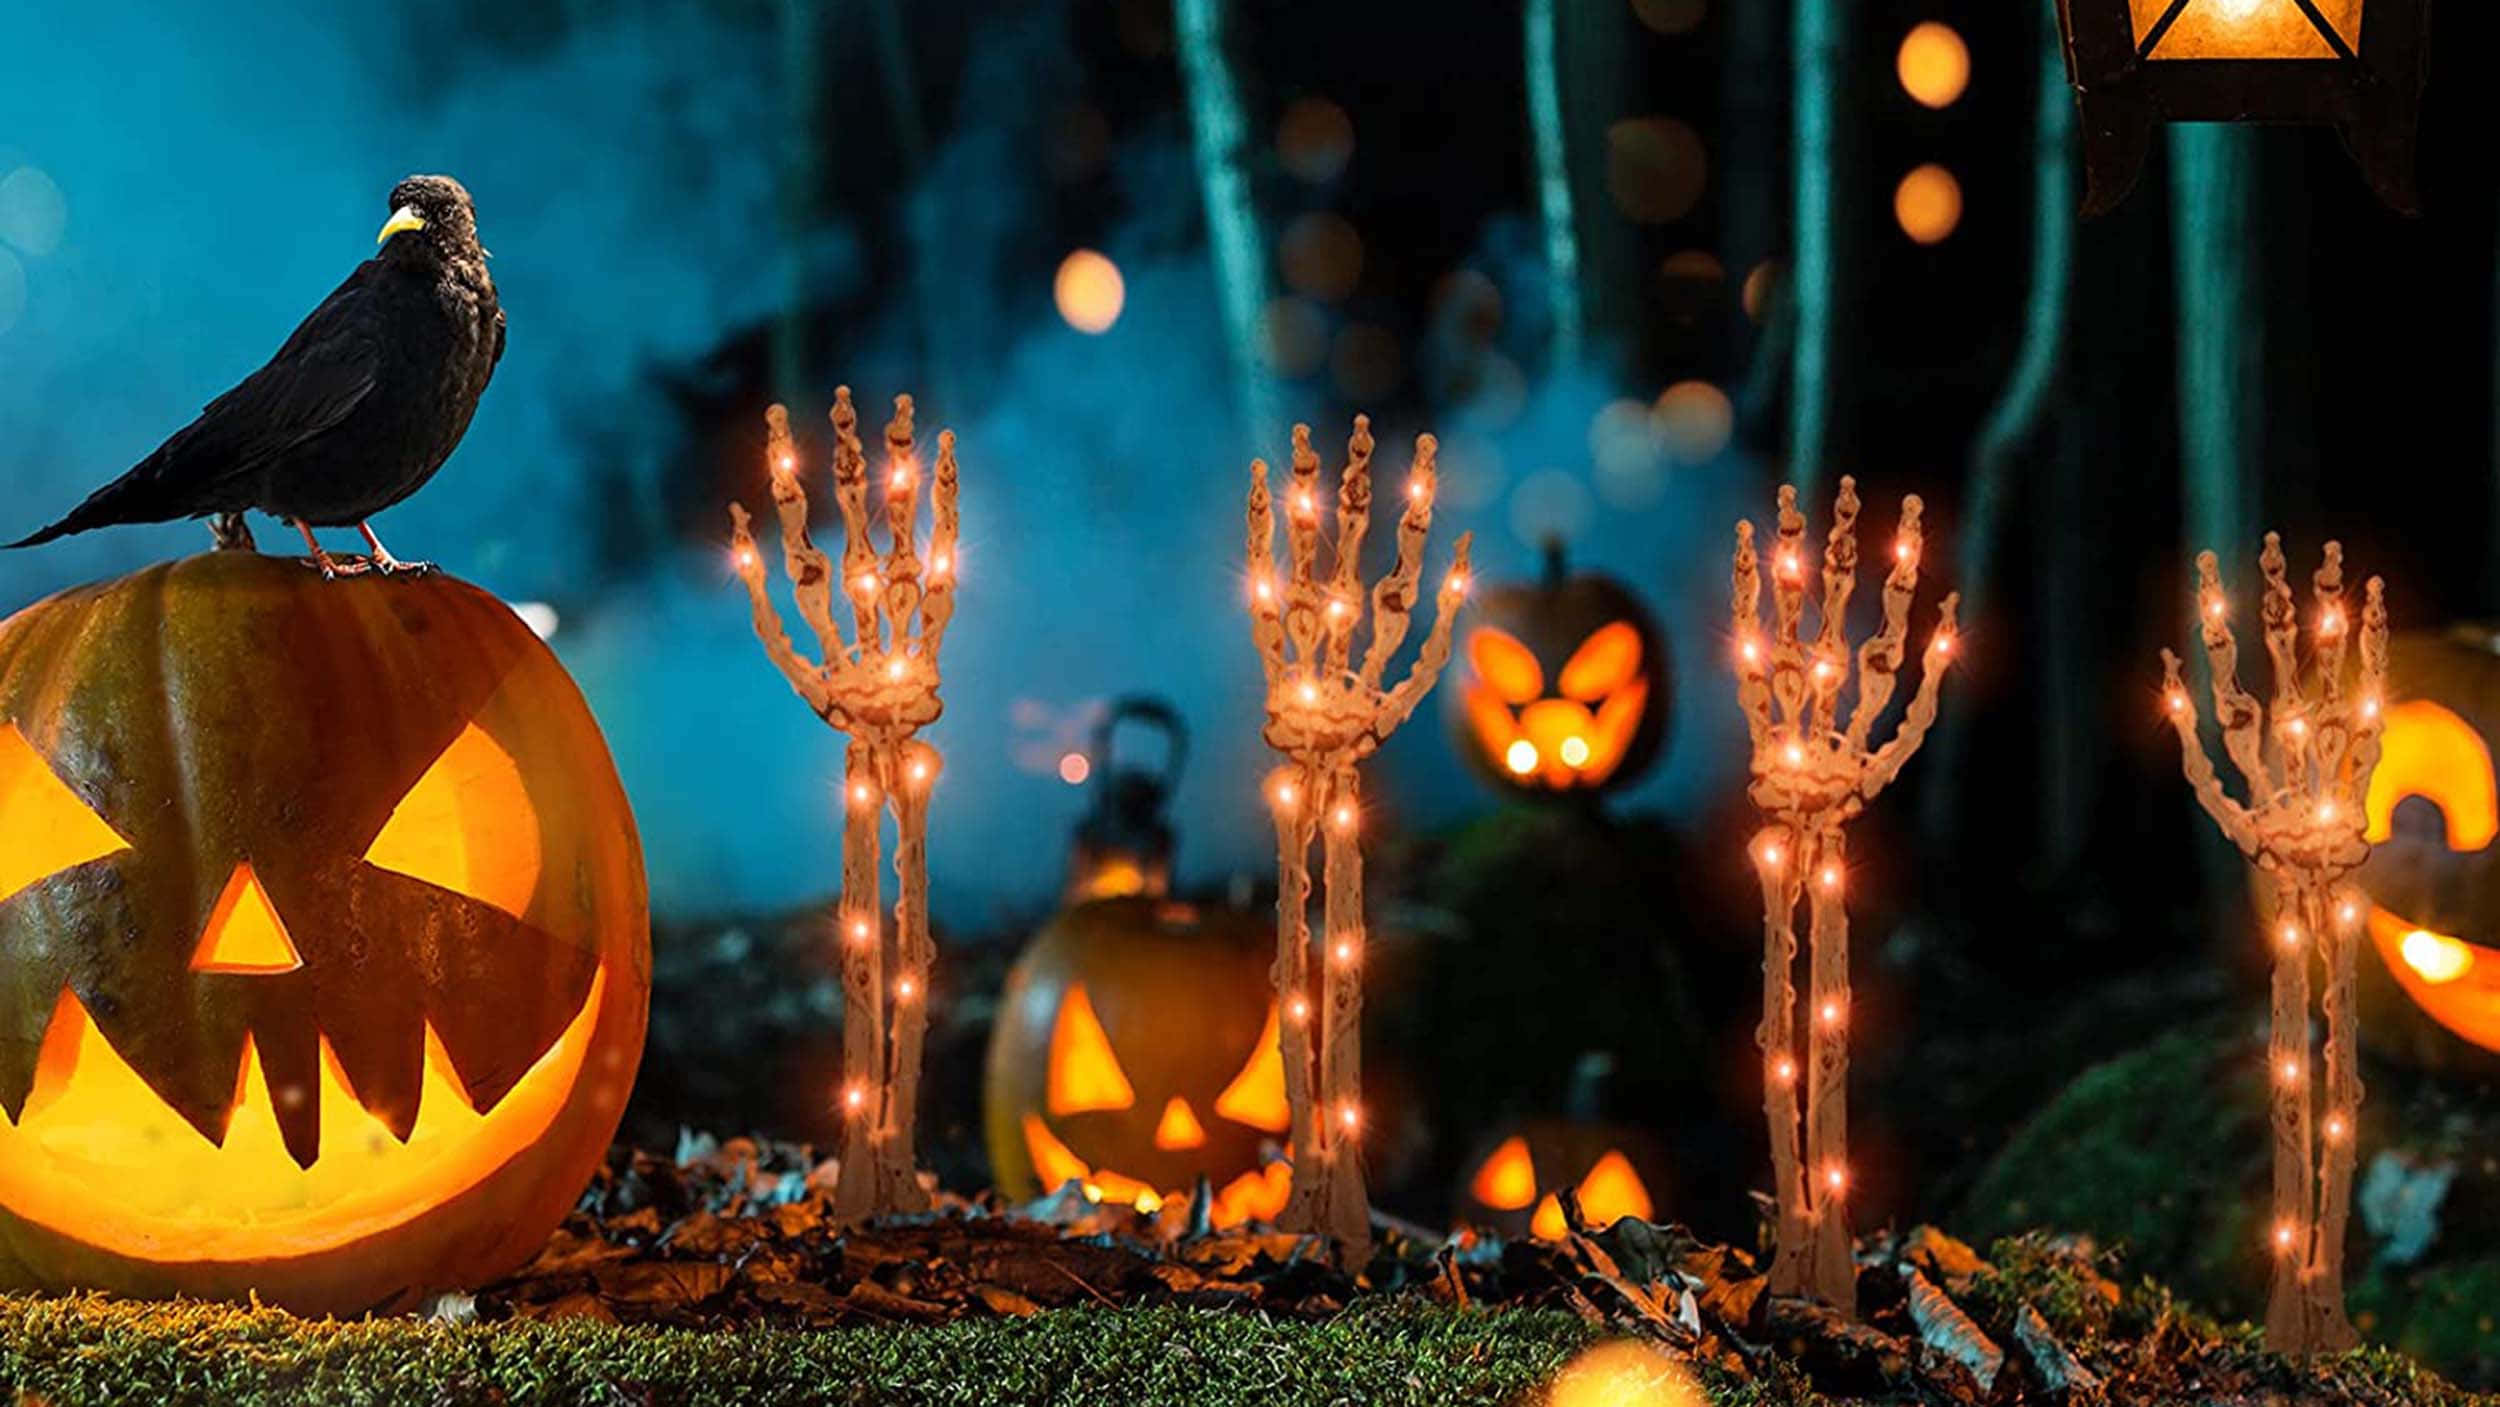 Trick-or-treating with these spooky Halloween Props! Wallpaper